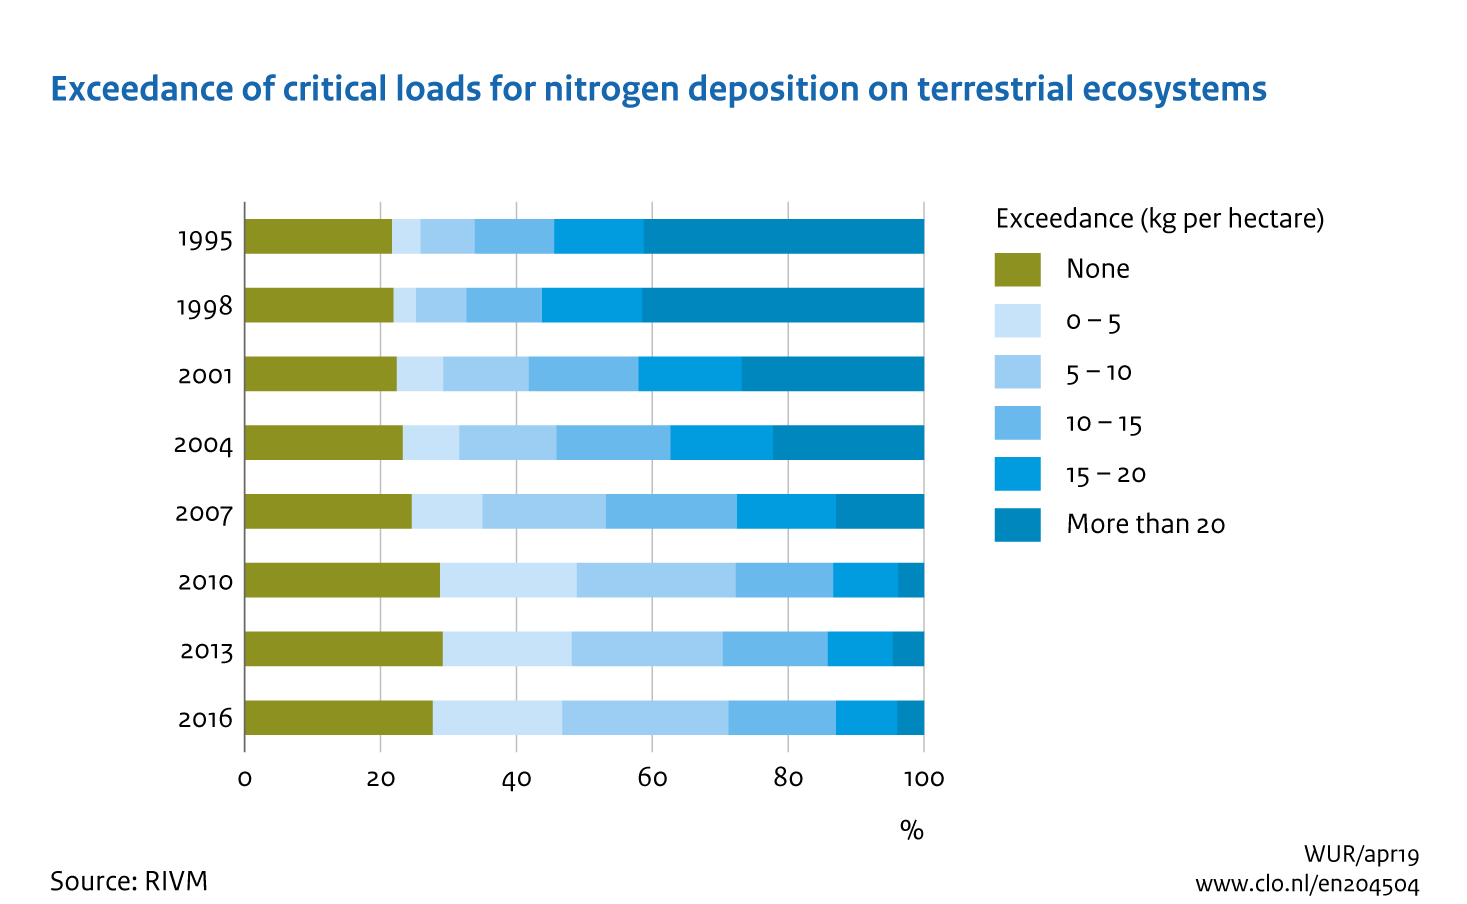 Image Exceedance of critical loads for nitrogen deposition on terrestrial ecosystems. The image is further explained in the text.